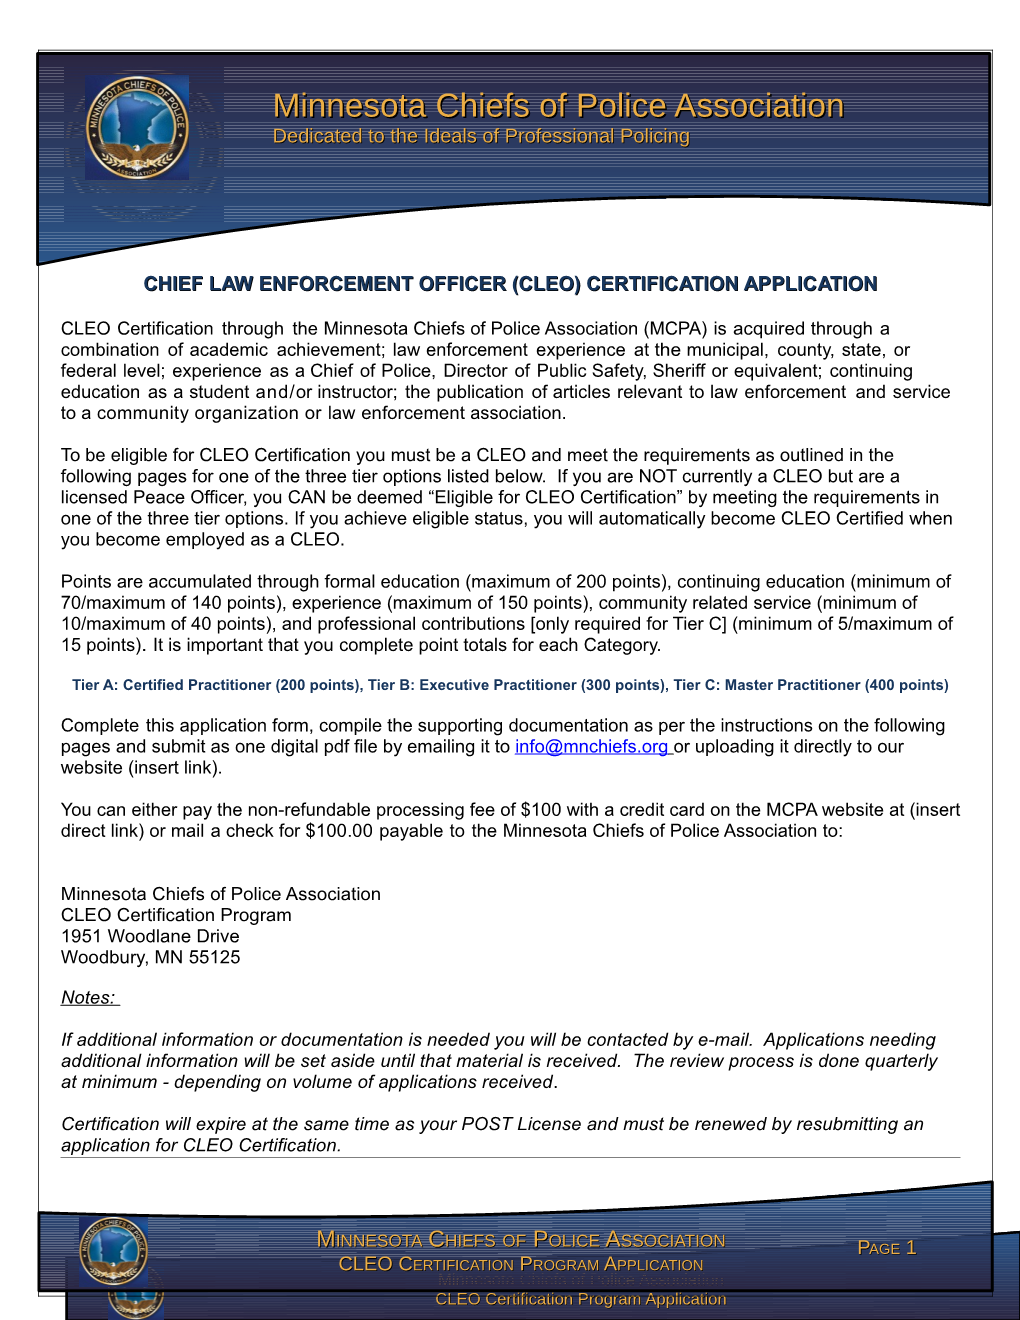 Chief Law Enforcement Officer (Cleo) Certification Application